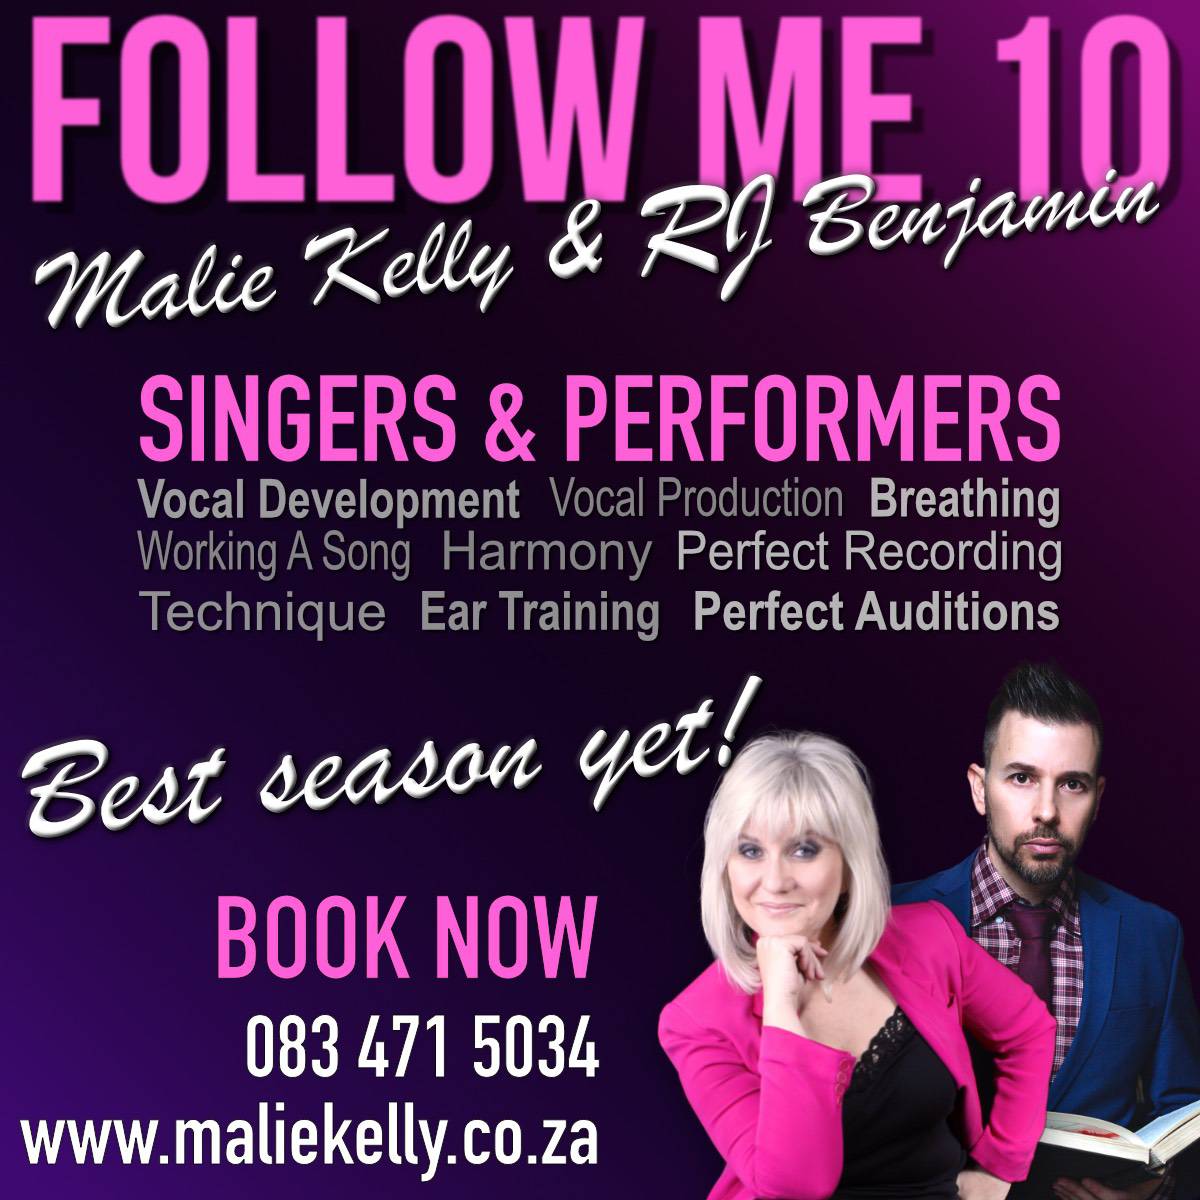 Malie Kelly Follow Me Facebook Post 15 July 2018-squashed